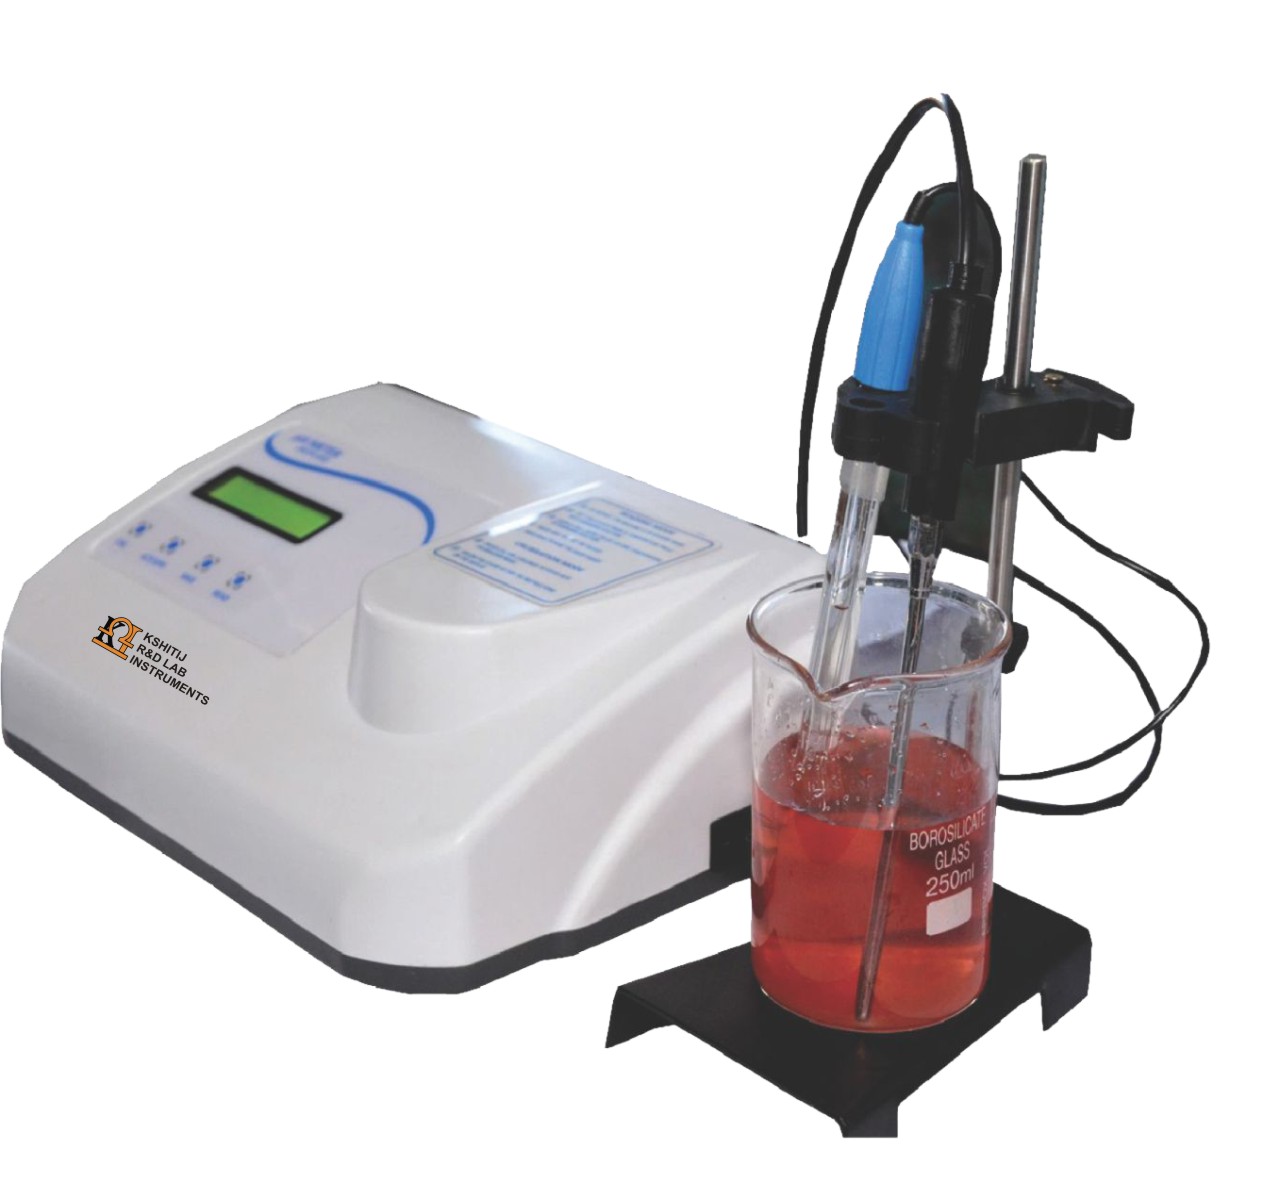 controller/assets/products_upload/ph Meter With ATC, Model No.: KI- 111